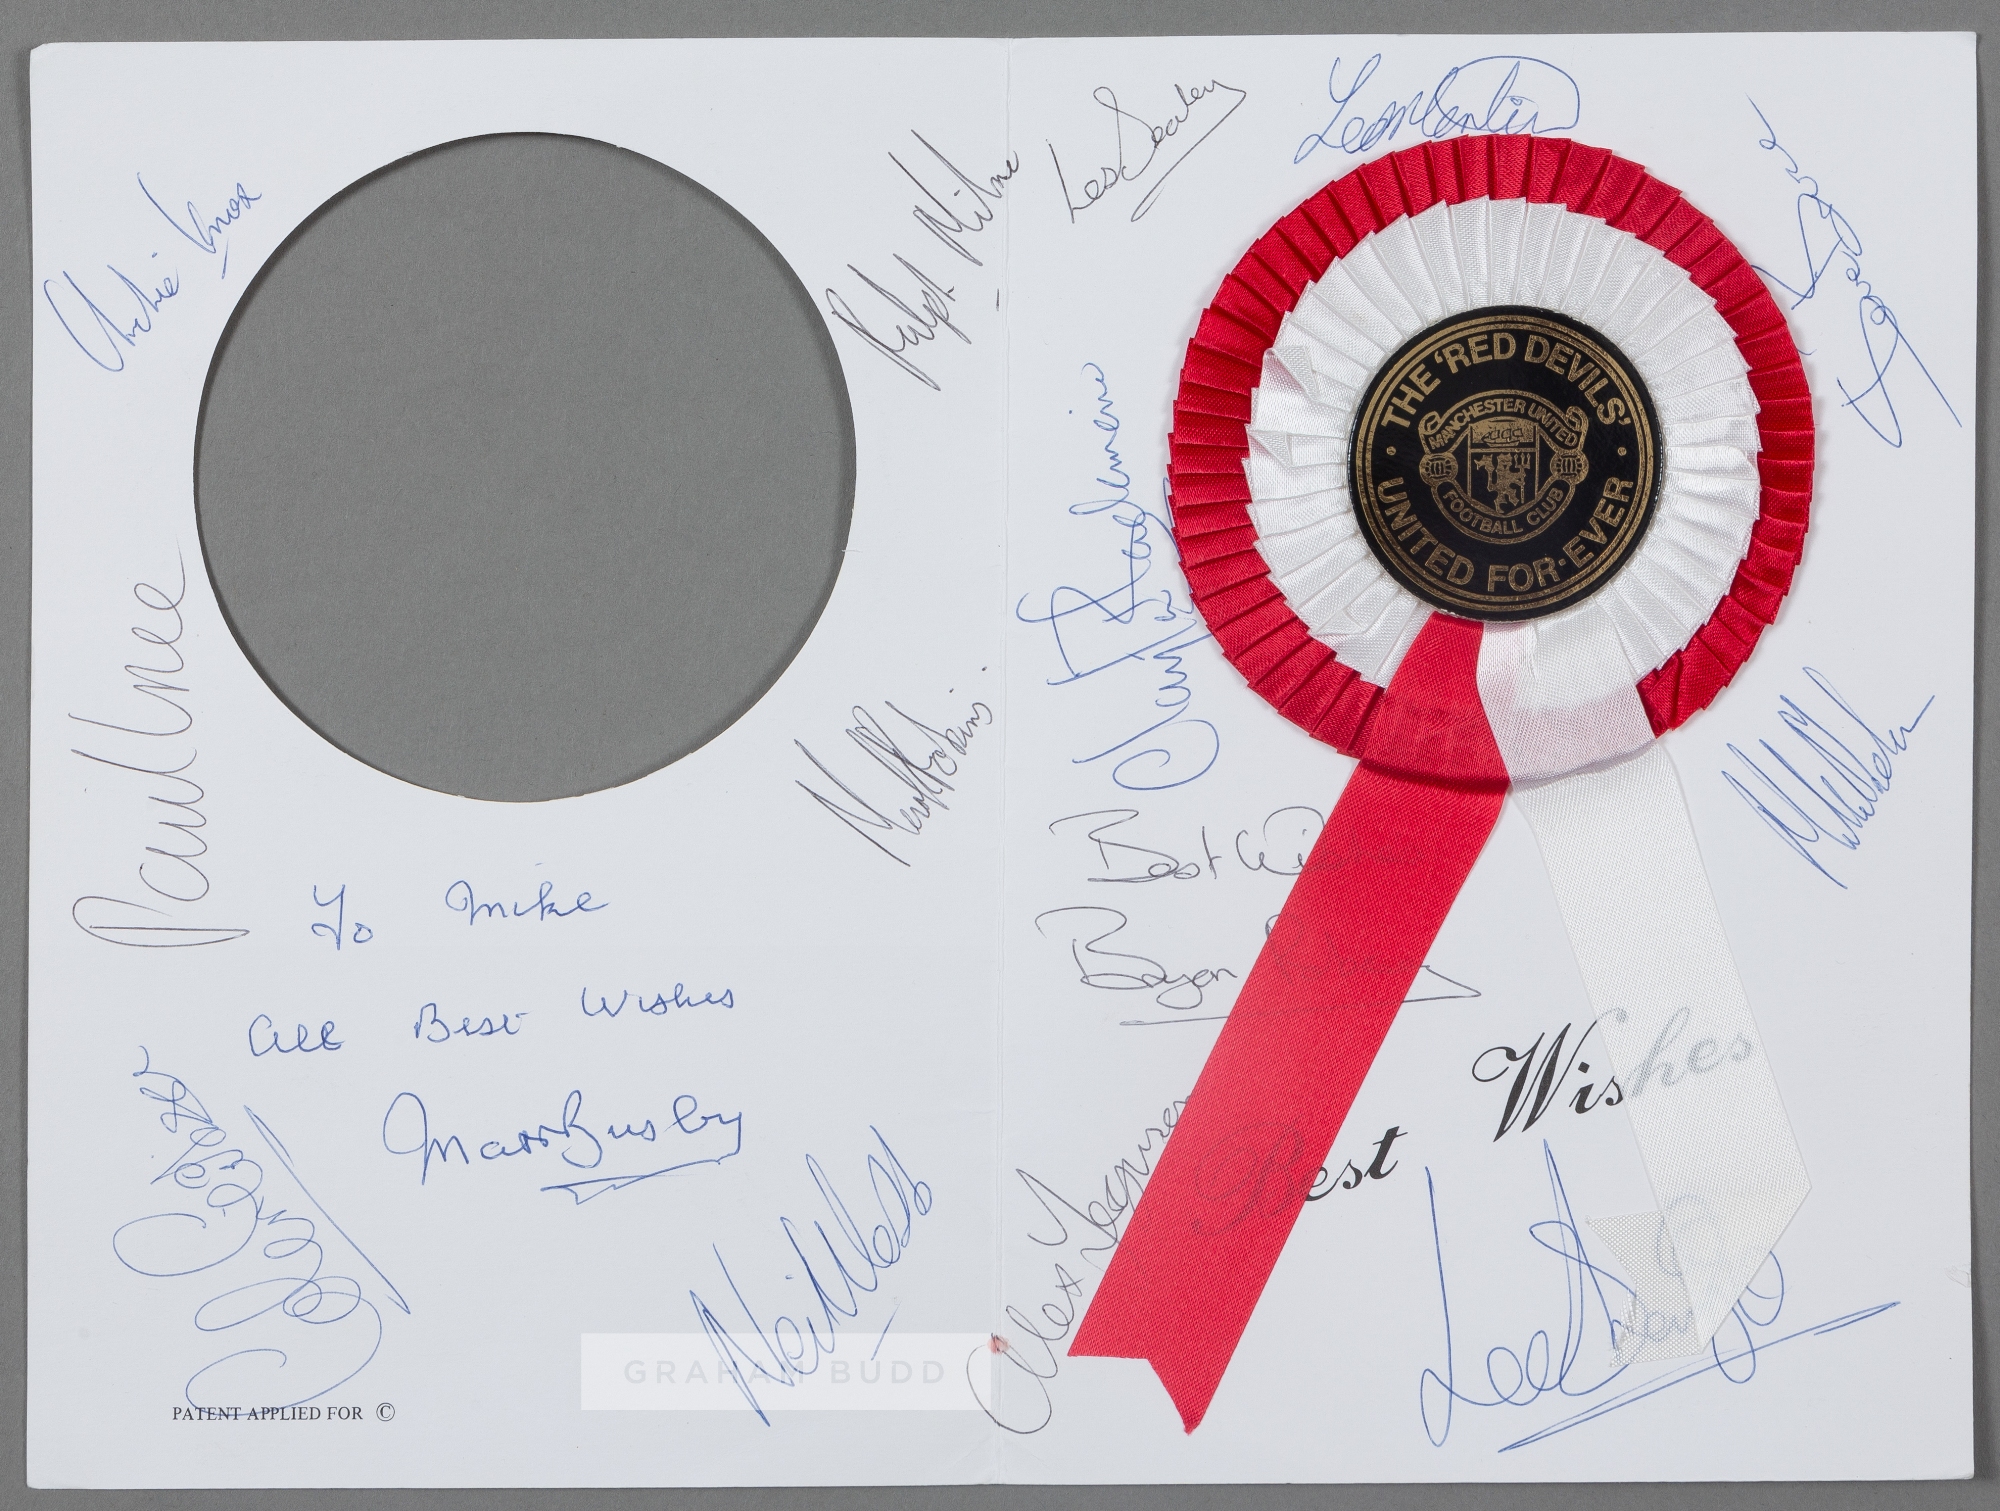 An autographed Manchester United Rosette greetings card, signed inside by Matt Busby, Alex Ferguson,